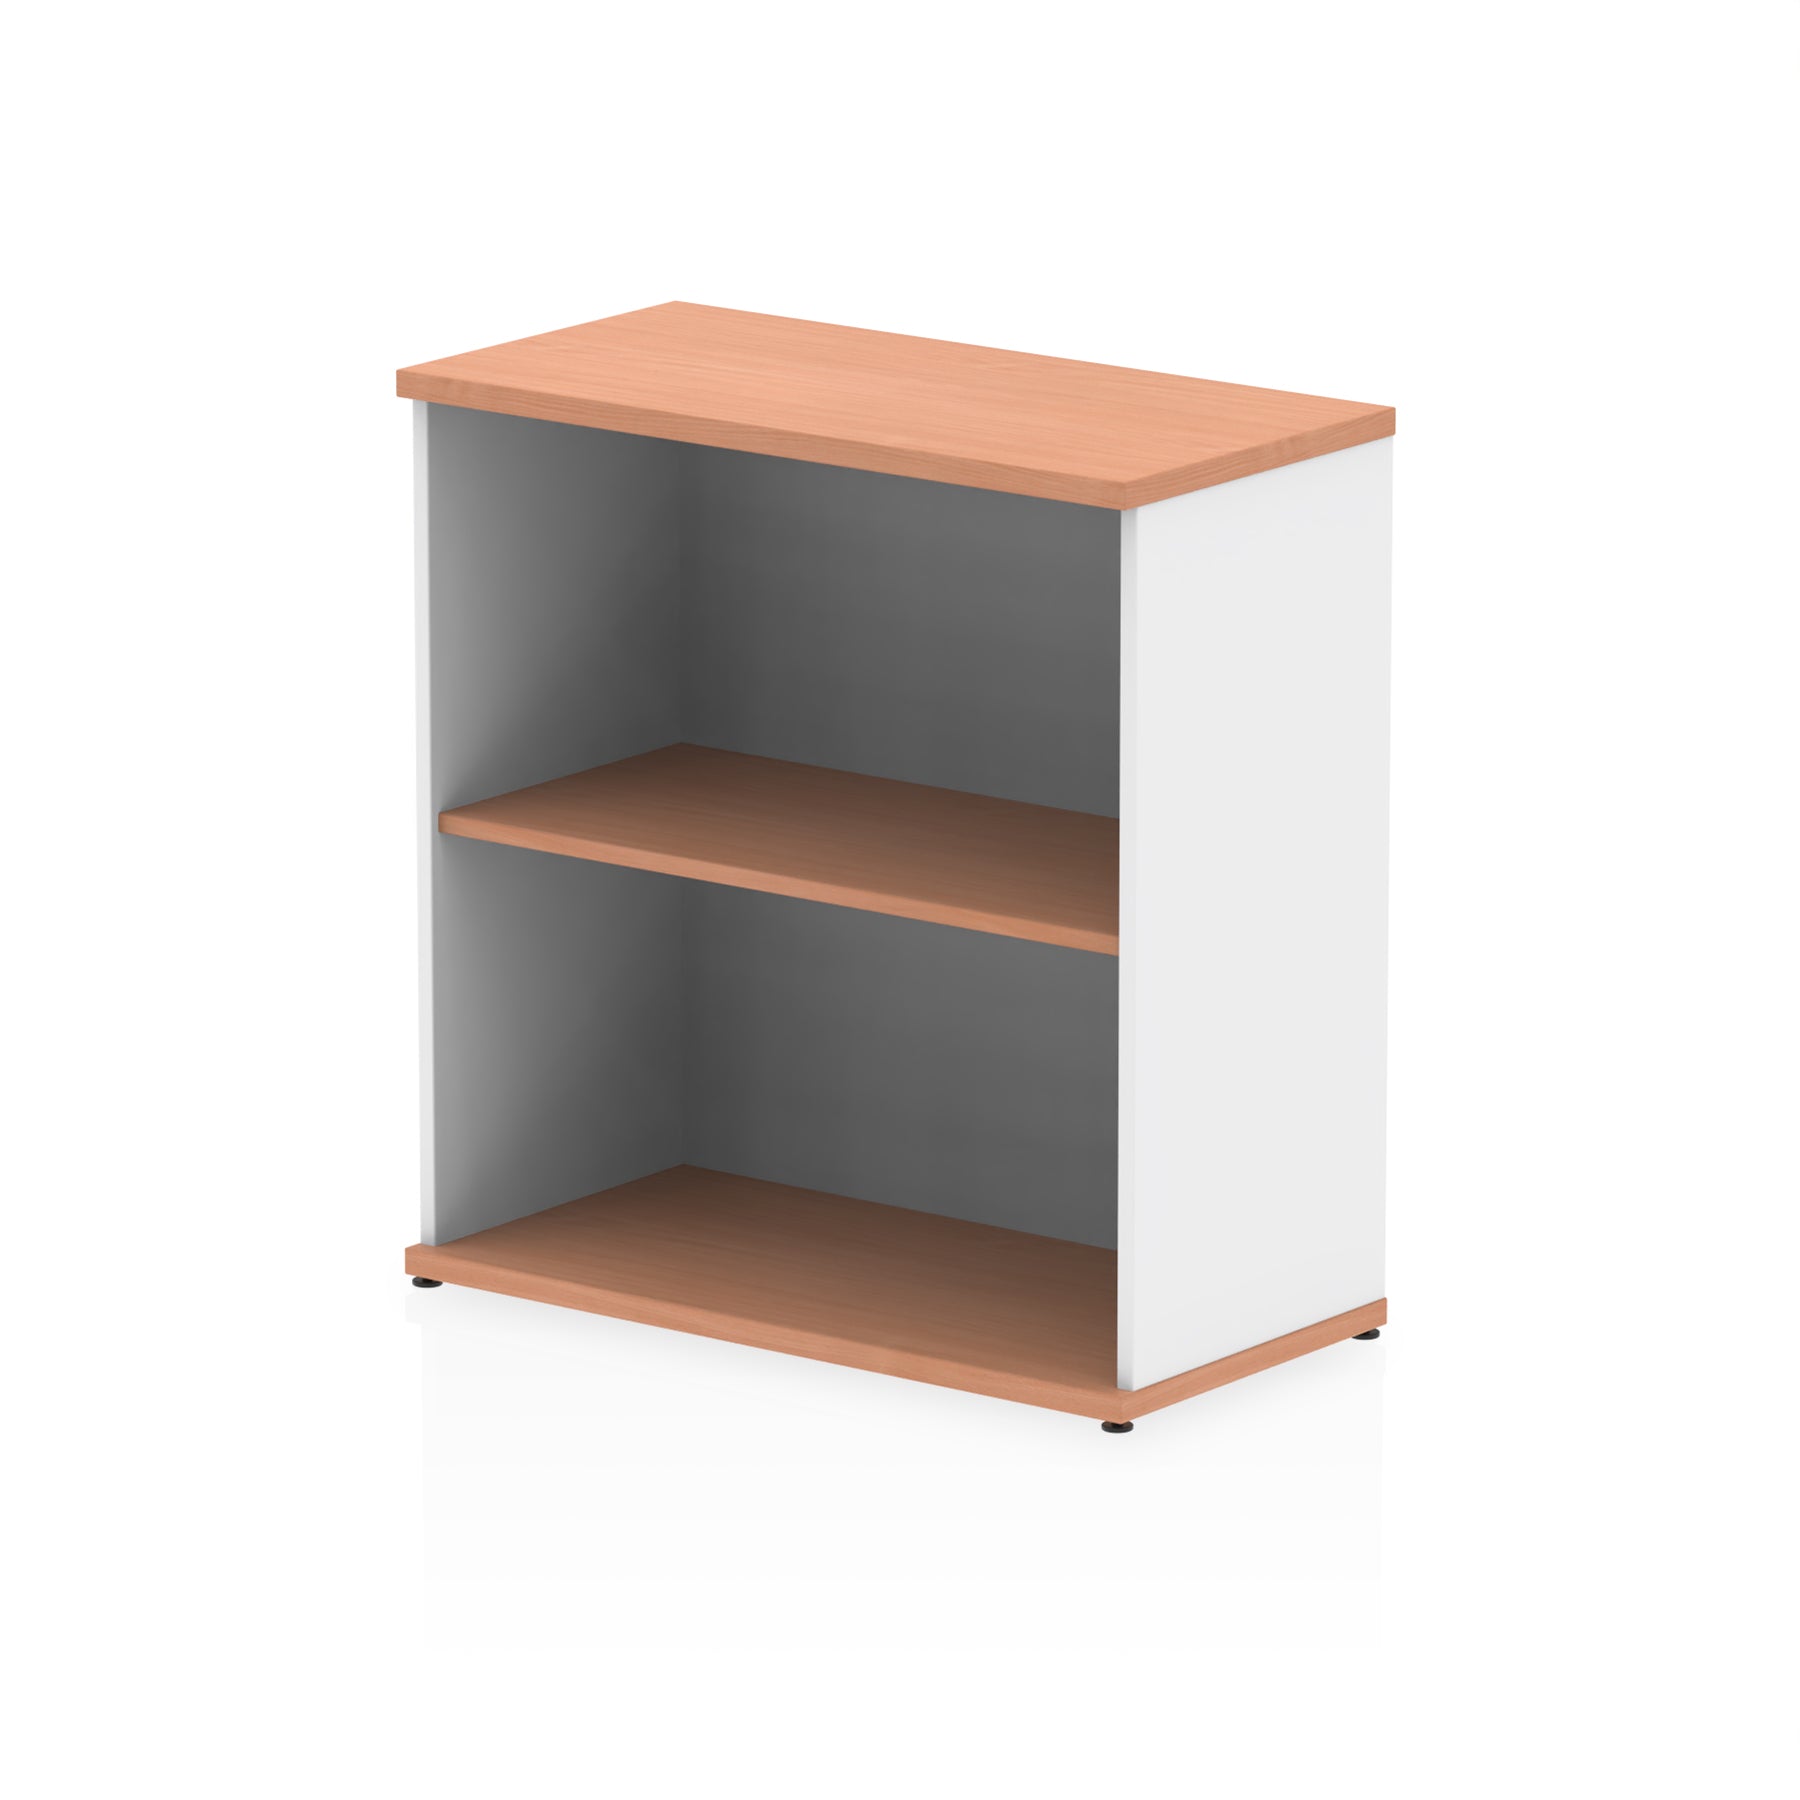 Impulse Bookcase (Available in 4 Sizes)